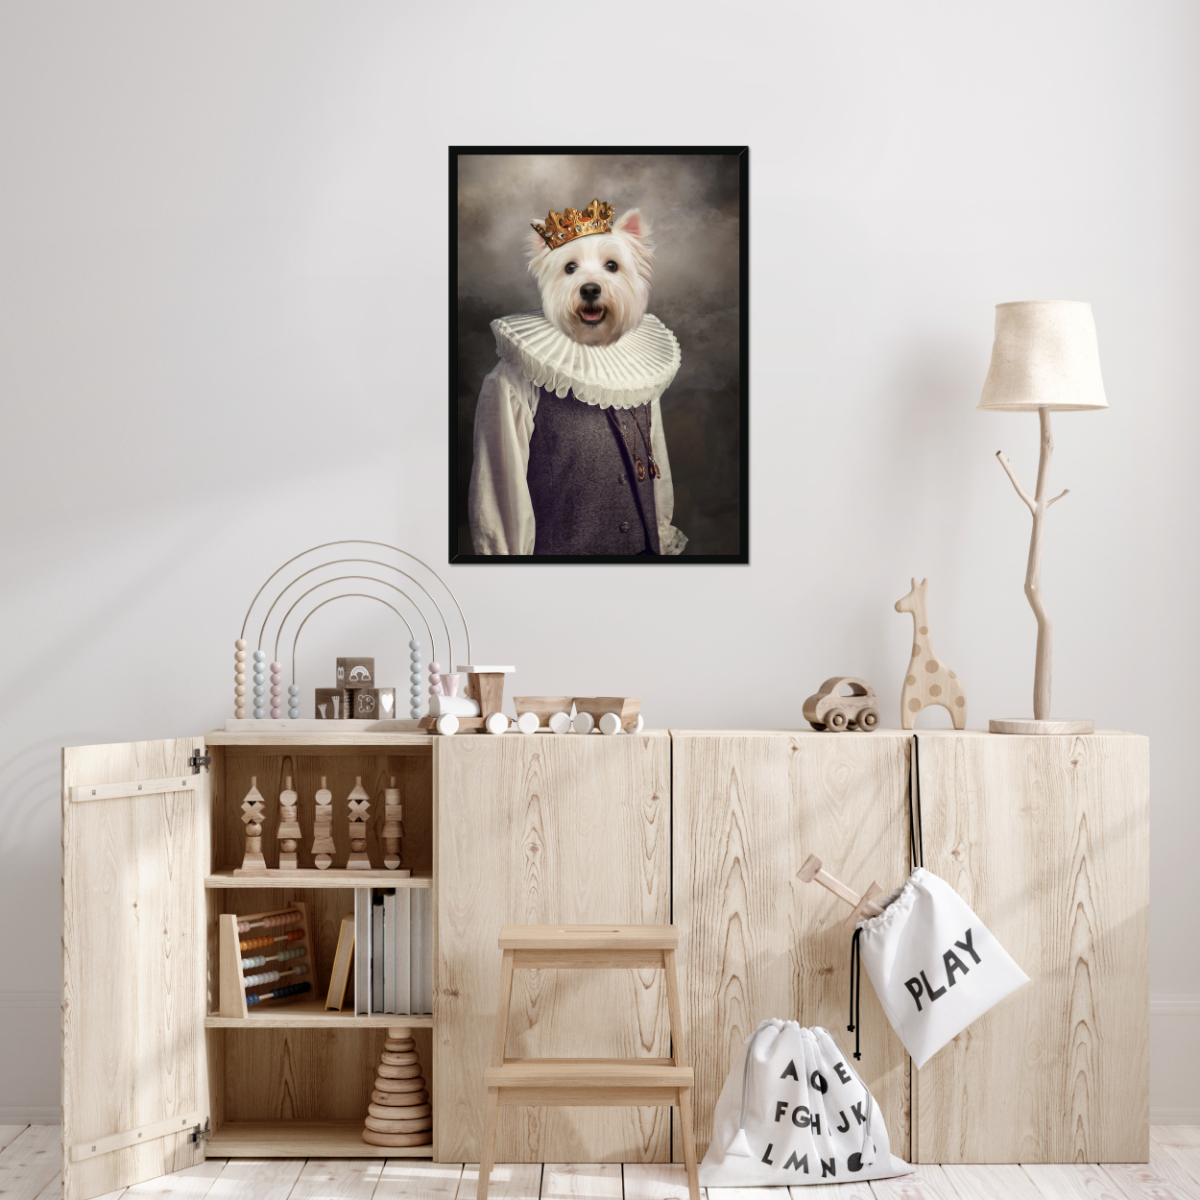 The Young Prince: Custom Pet Portrait - Paw & Glory, paw and glory, dog astronaut photo, dog drawing from photo, draw your pet portrait, dog portraits singapore, cat picture painting, custom dog painting, pet portrait